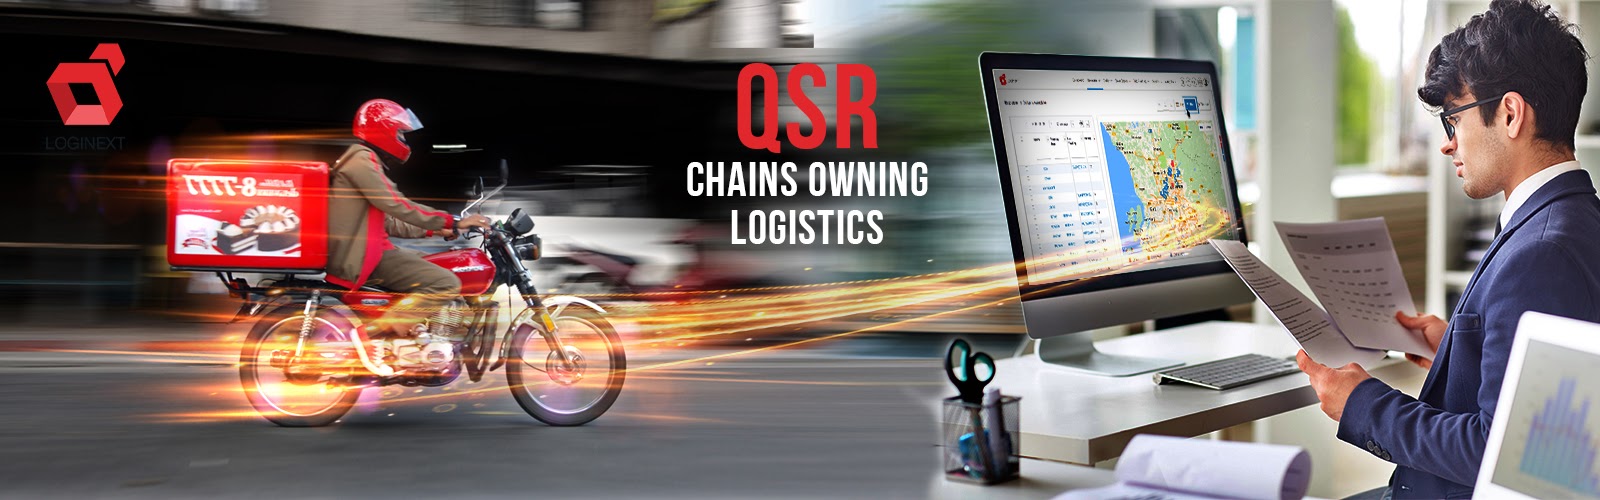 QSR chains are improving profitability by owning logistics